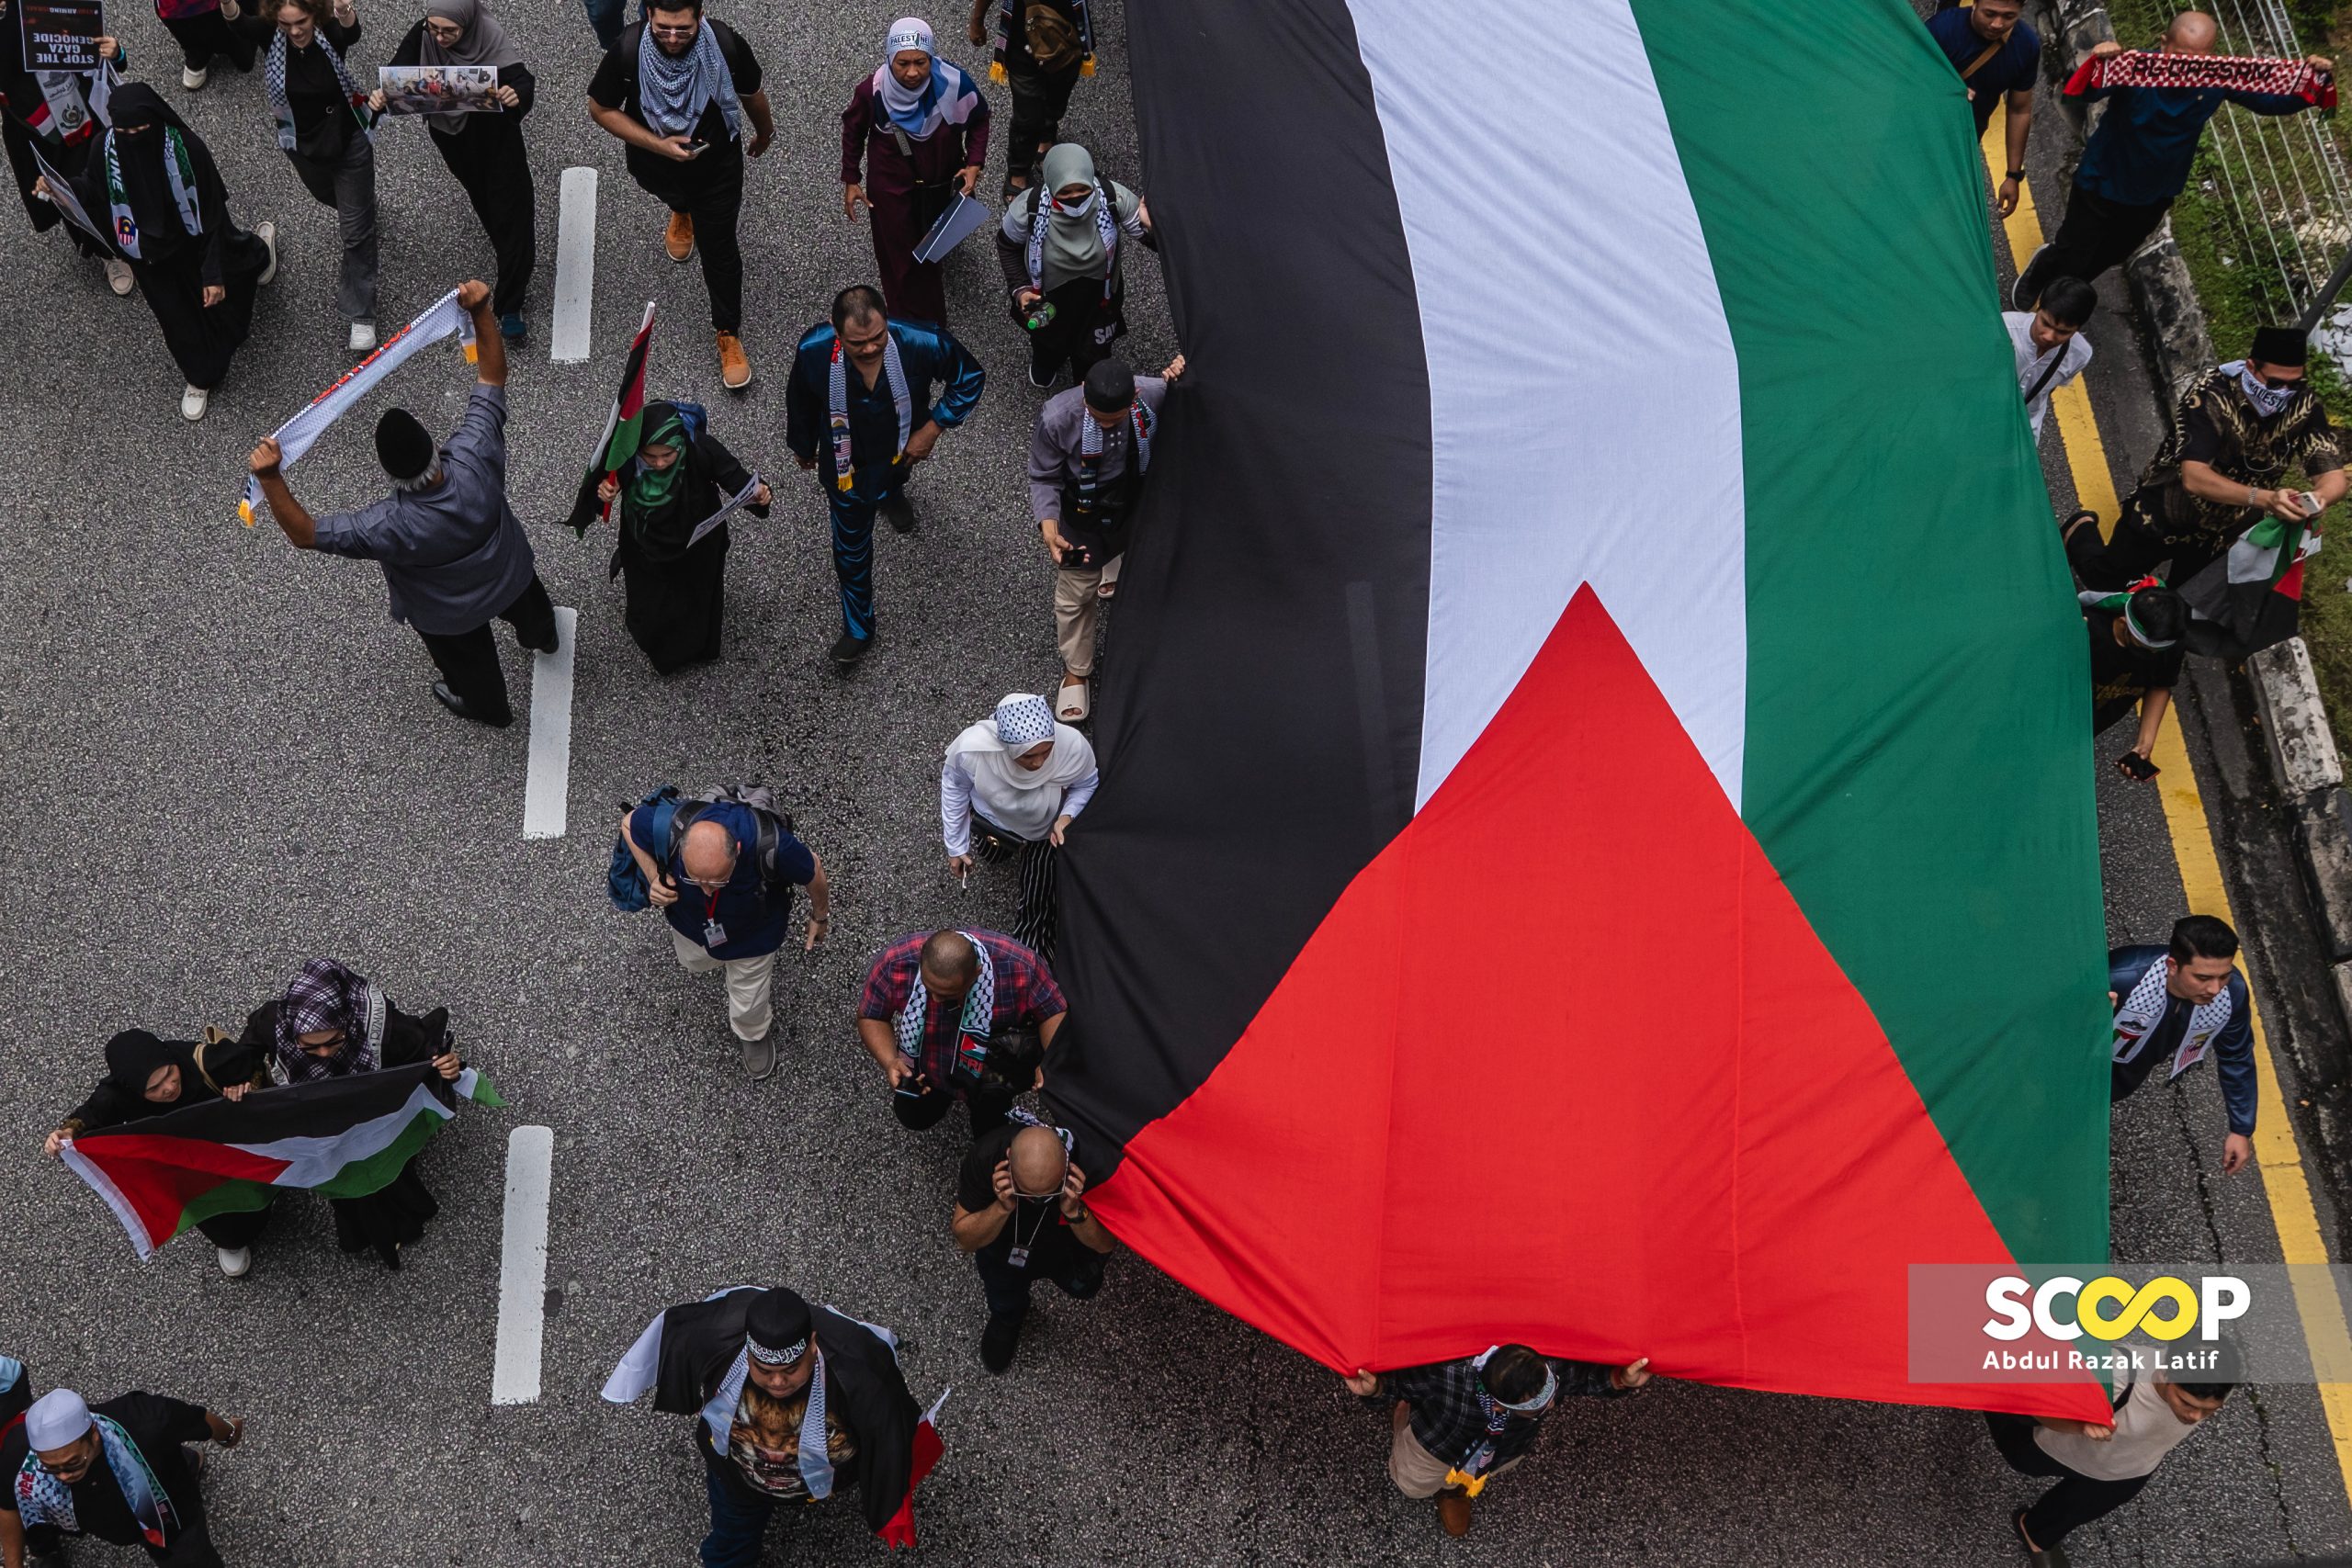 Tonight’s Palestine rally to focus on bigger issues, not takbir fracas: Na’im 